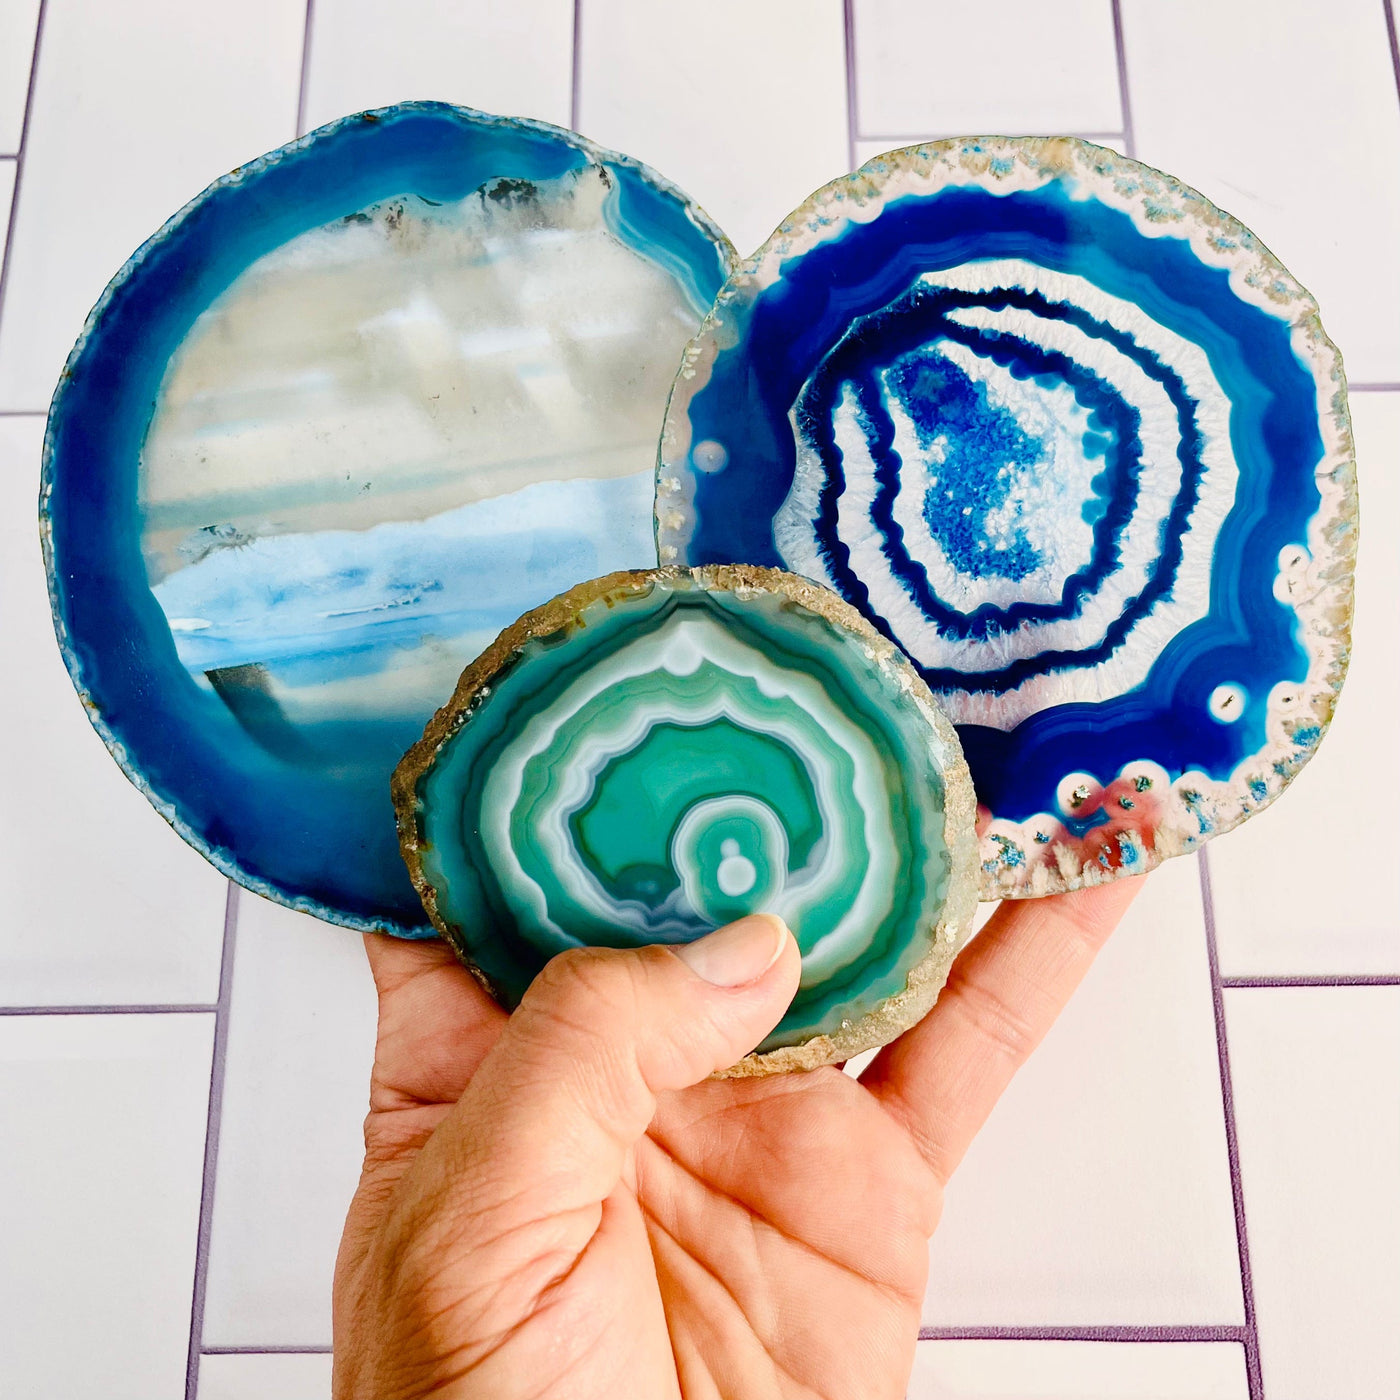 Frontal view of Set of 3 Agate Slices - Dyed Blue and Green, fanned out while held in woman's hand.